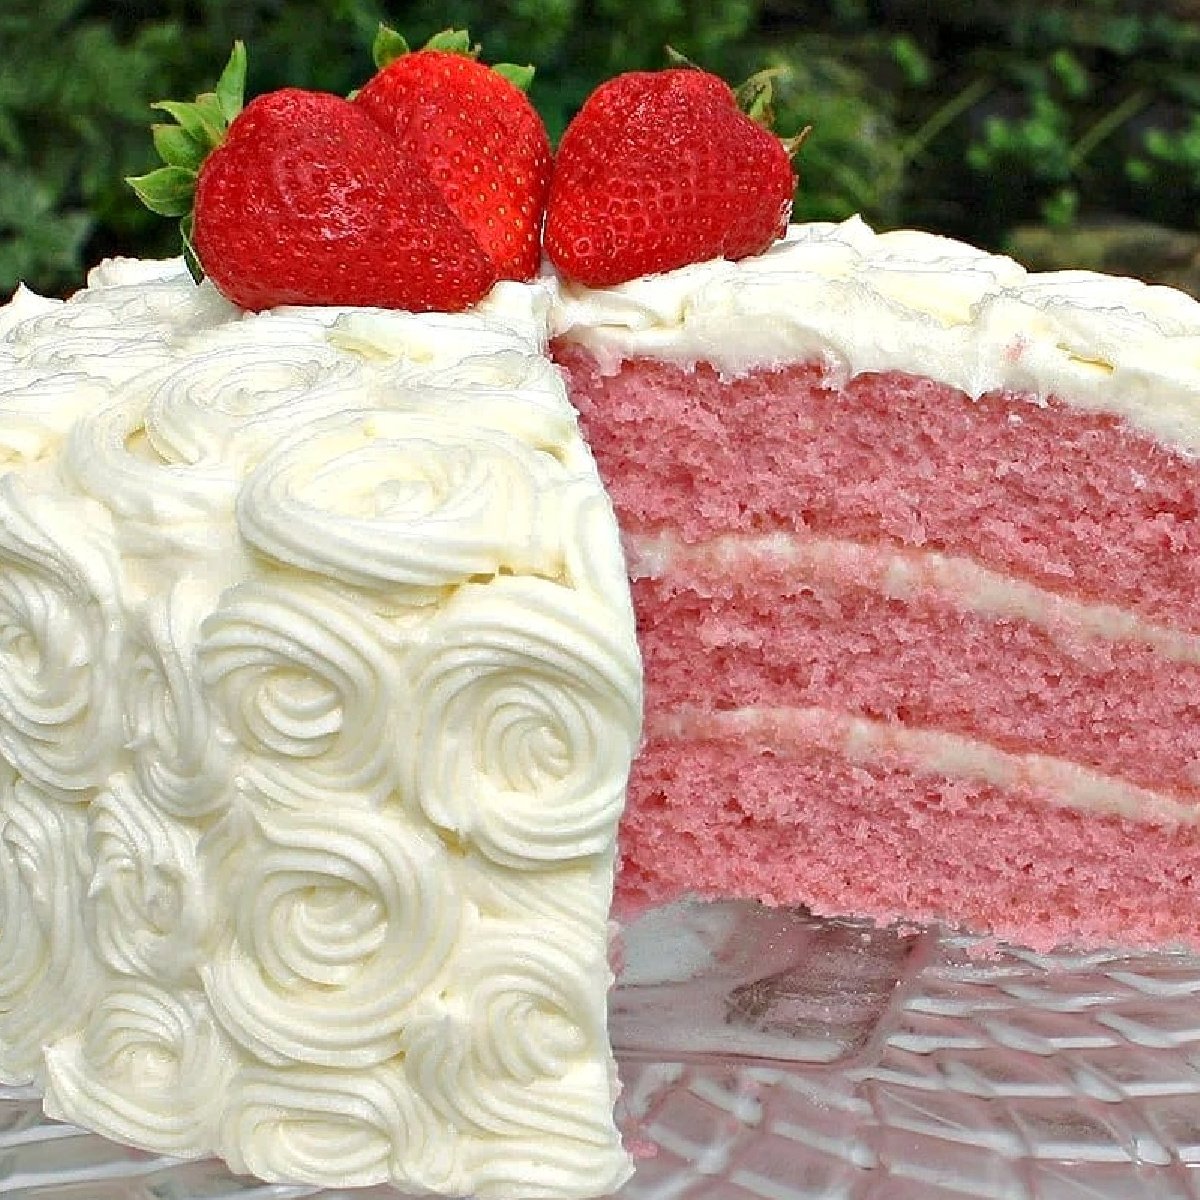 Sliced Strawberry Cake from Scratch, on a clear glass pedestal.